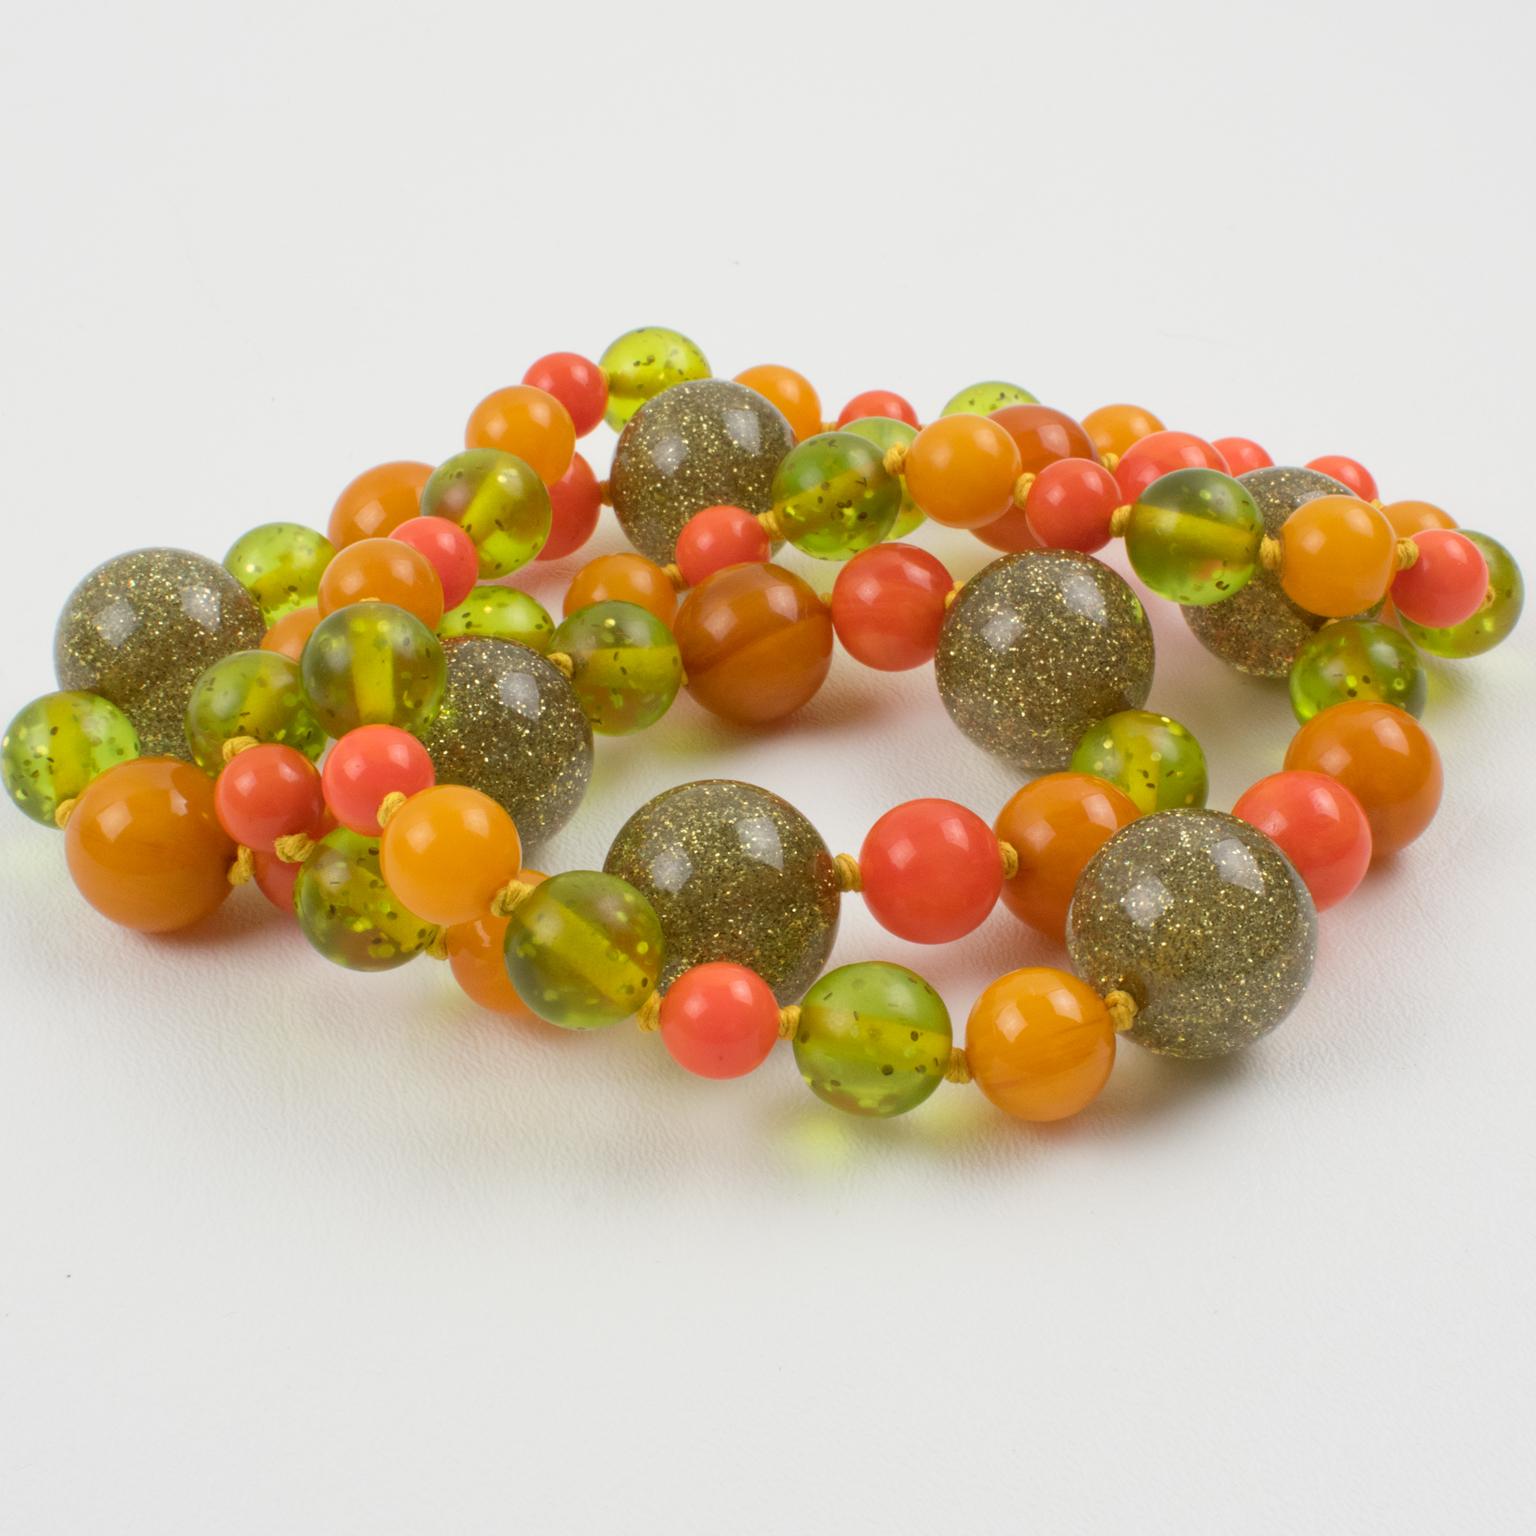 Bakelite and Lucite Extra Long Necklace with Orange, Green and Glitter Beads In Excellent Condition For Sale In Atlanta, GA